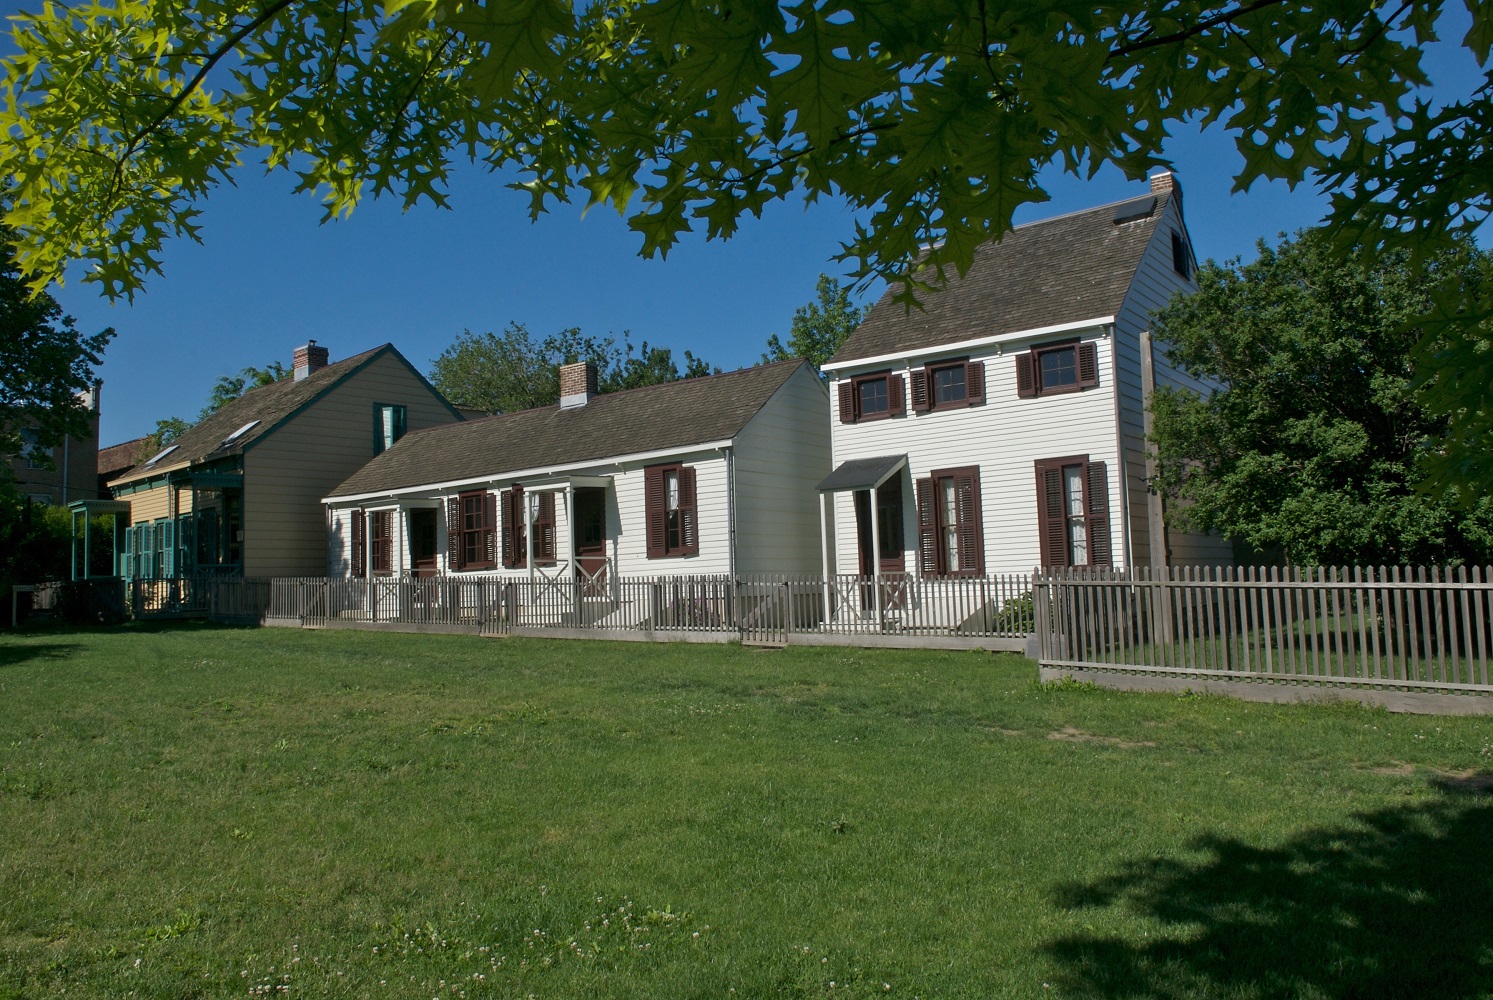 The exterior of the Weeksville houses with a green lawn in foreground